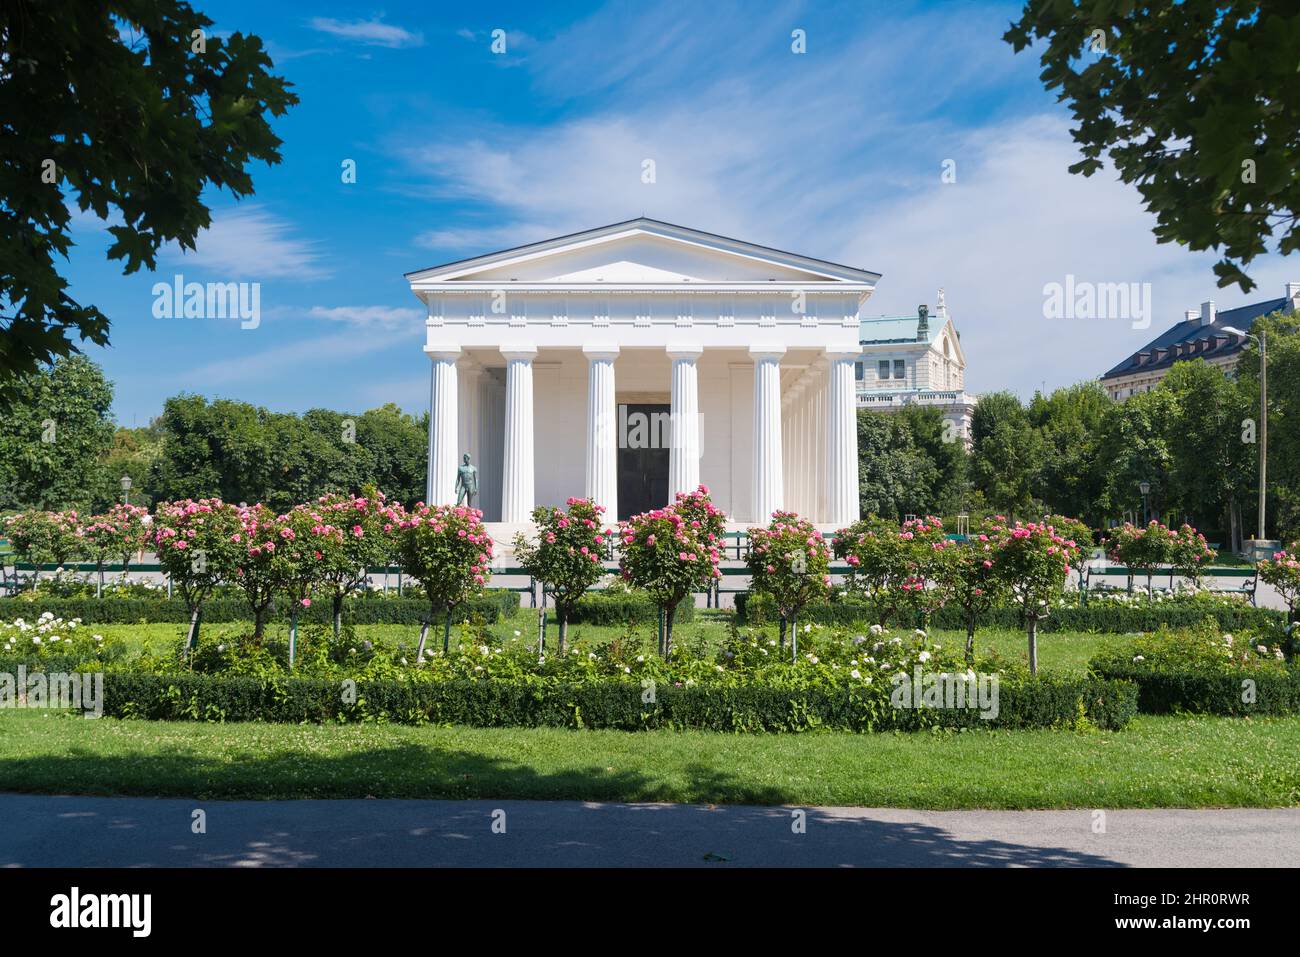 The Theseus Temple is a classical building in the Volksgarten in Vienna's 1st district, the inner city. Architecture. The temple was built from 1819 t Stock Photo